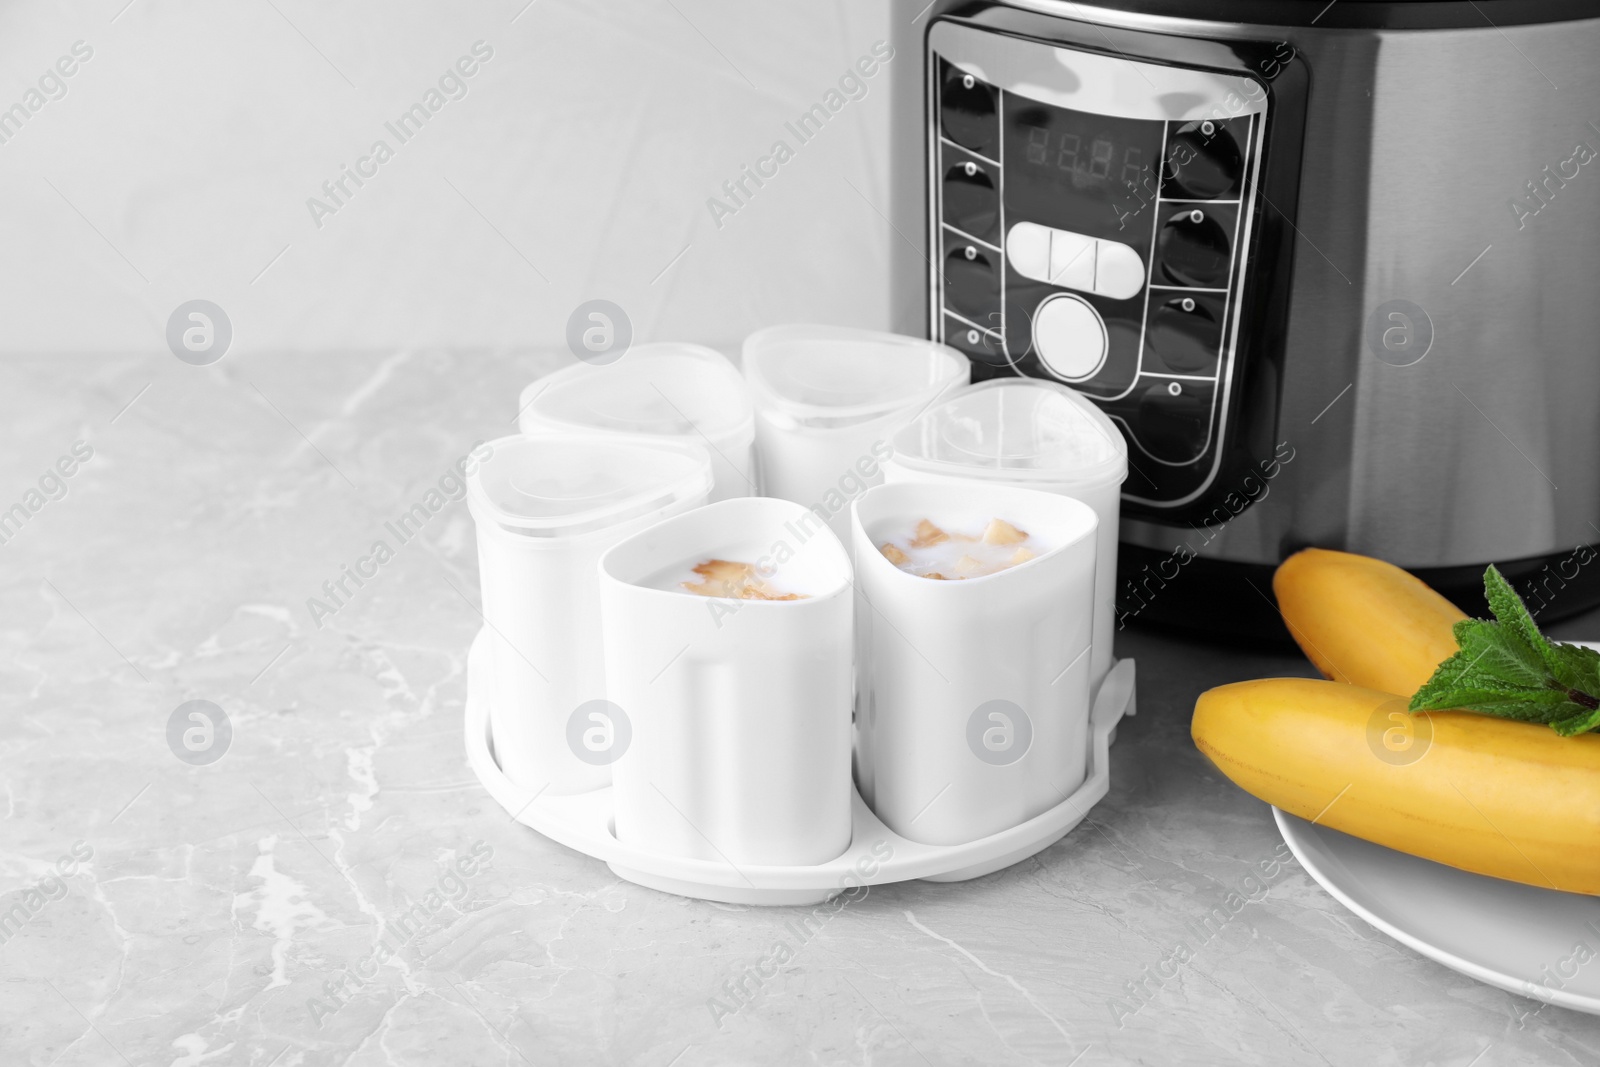 Photo of Cups of yogurt with bananas and multi cooker on table. Space for text